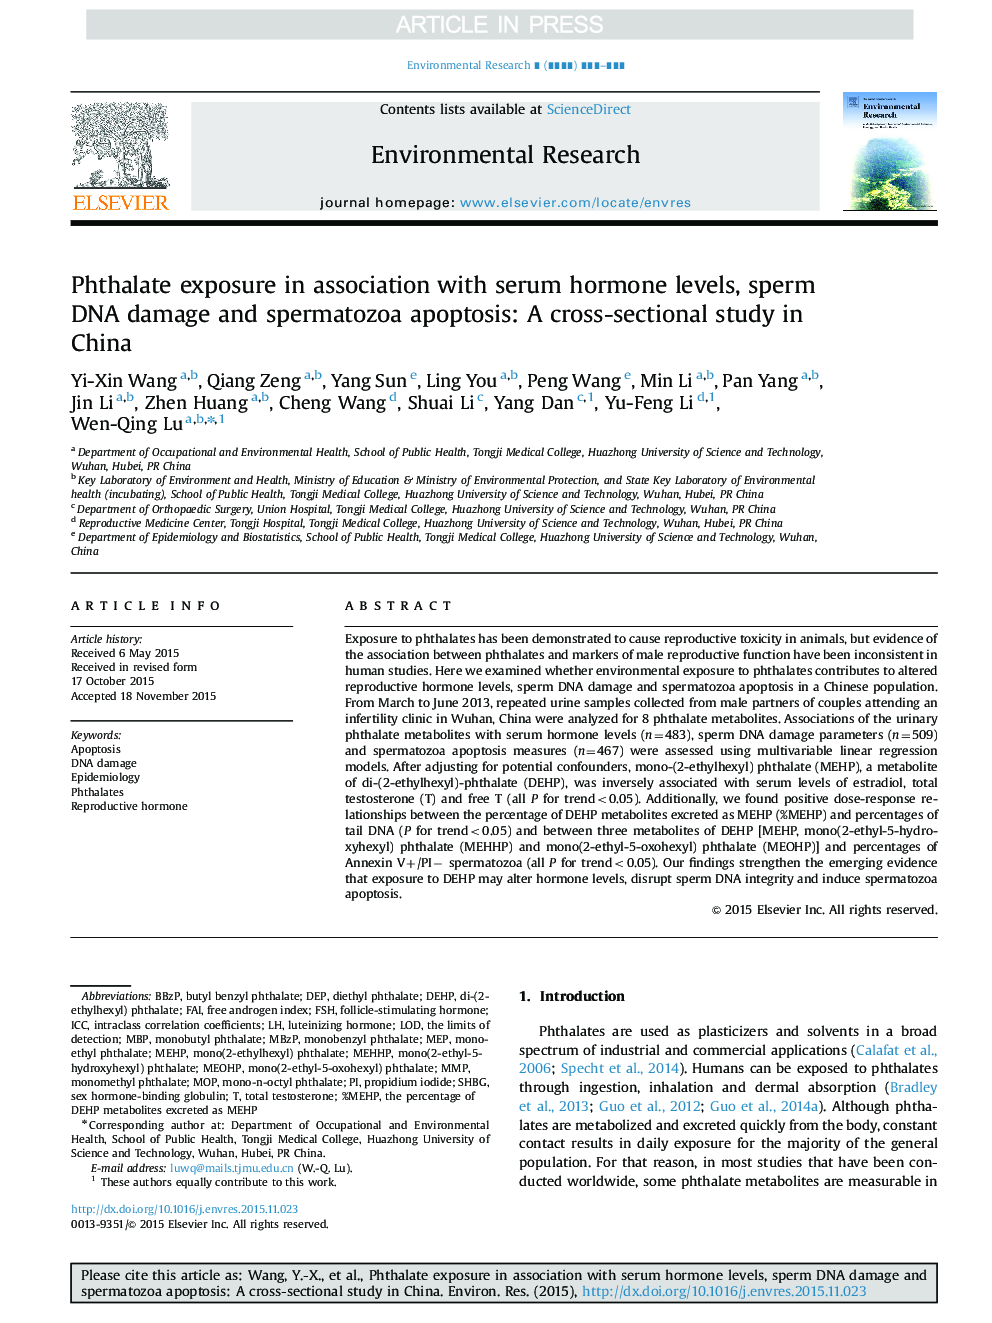 Phthalate exposure in association with serum hormone levels, sperm DNA damage and spermatozoa apoptosis: A cross-sectional study in China